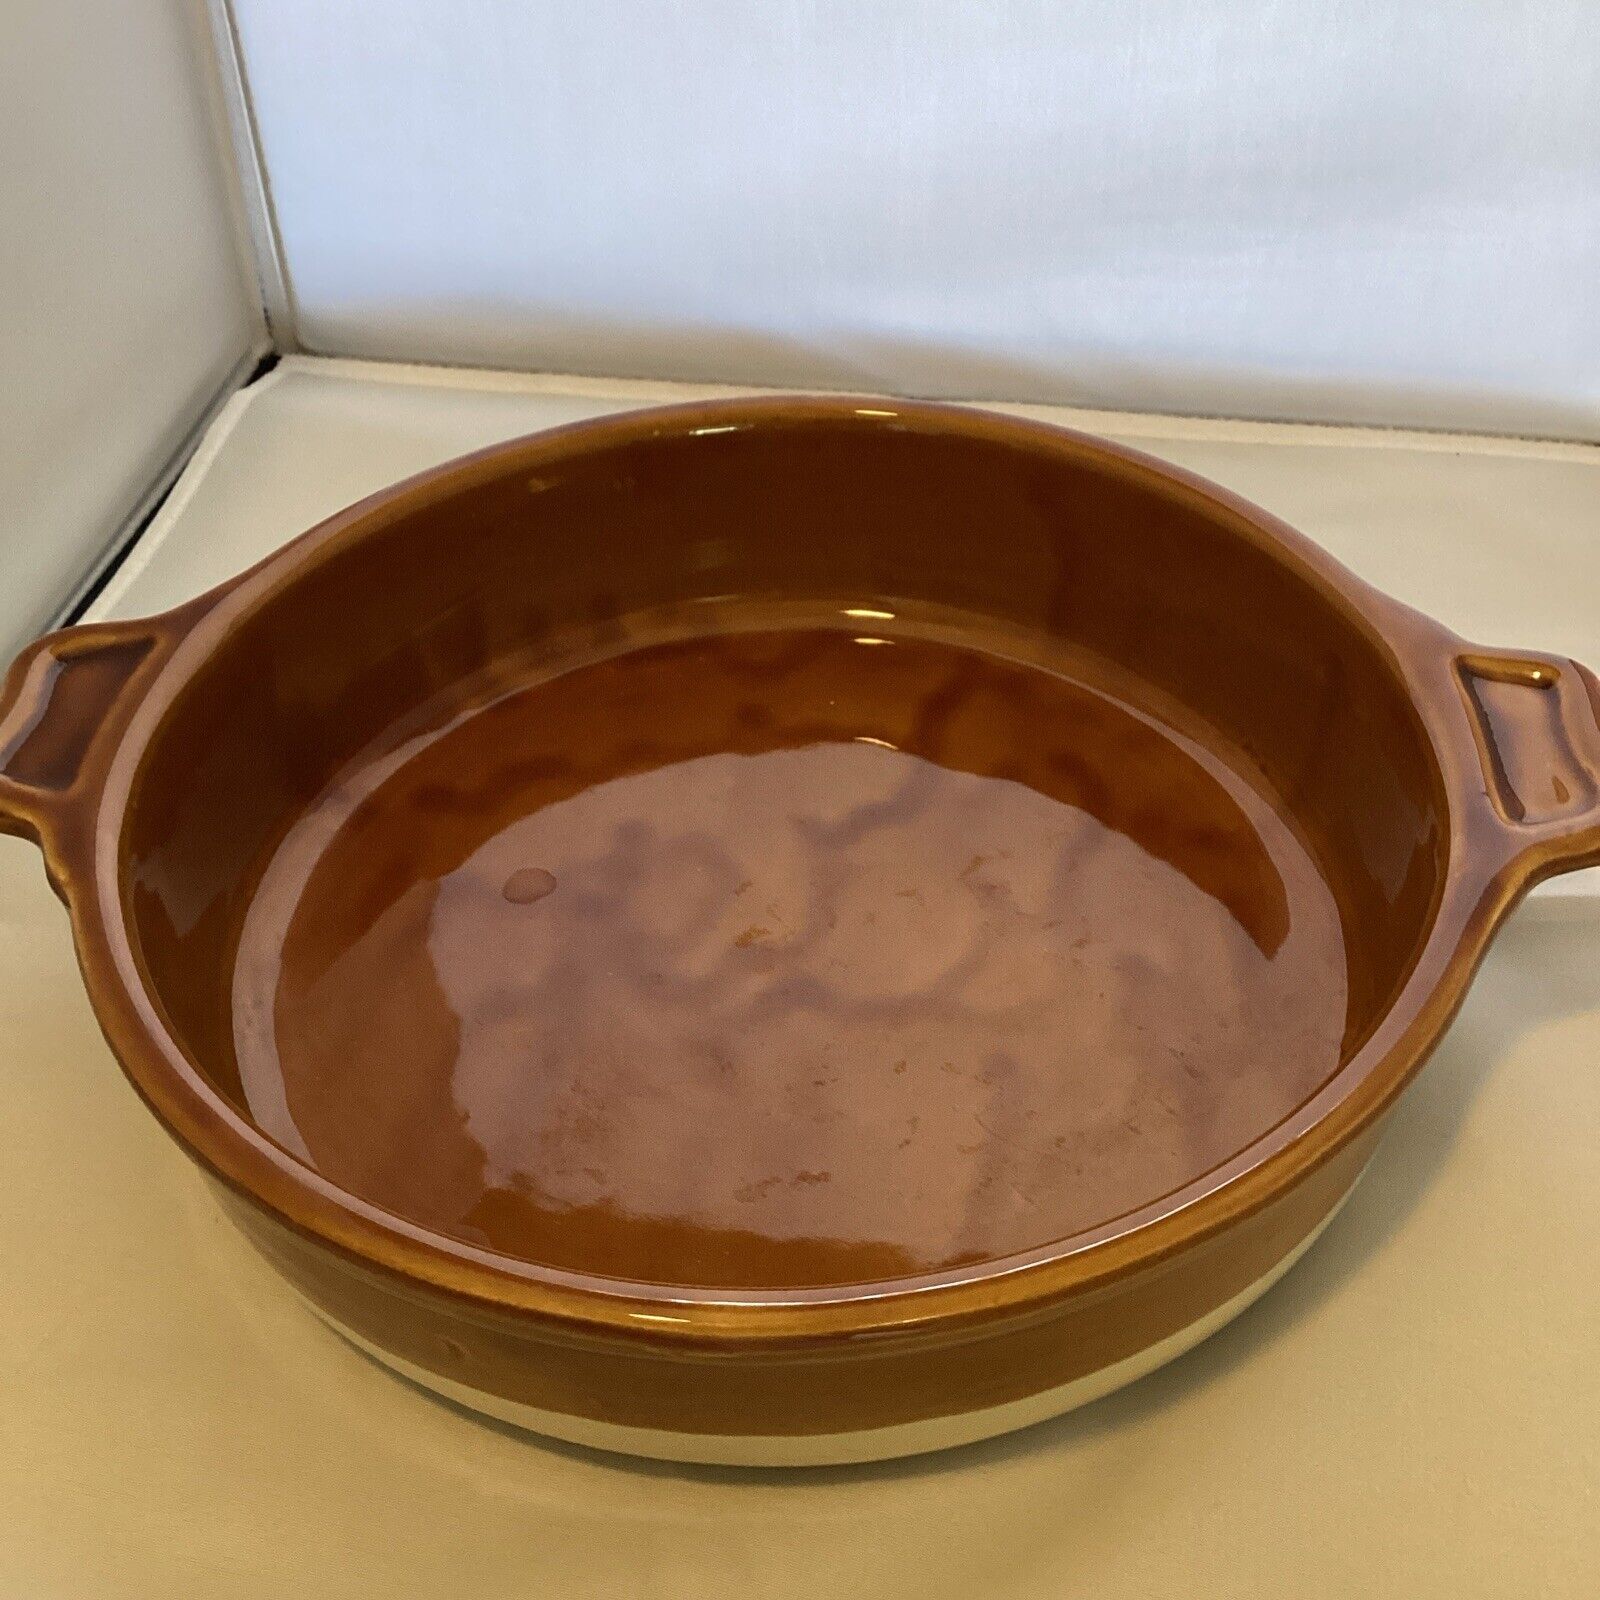  Brown Casserole Dish From France  3186 Emile Henry